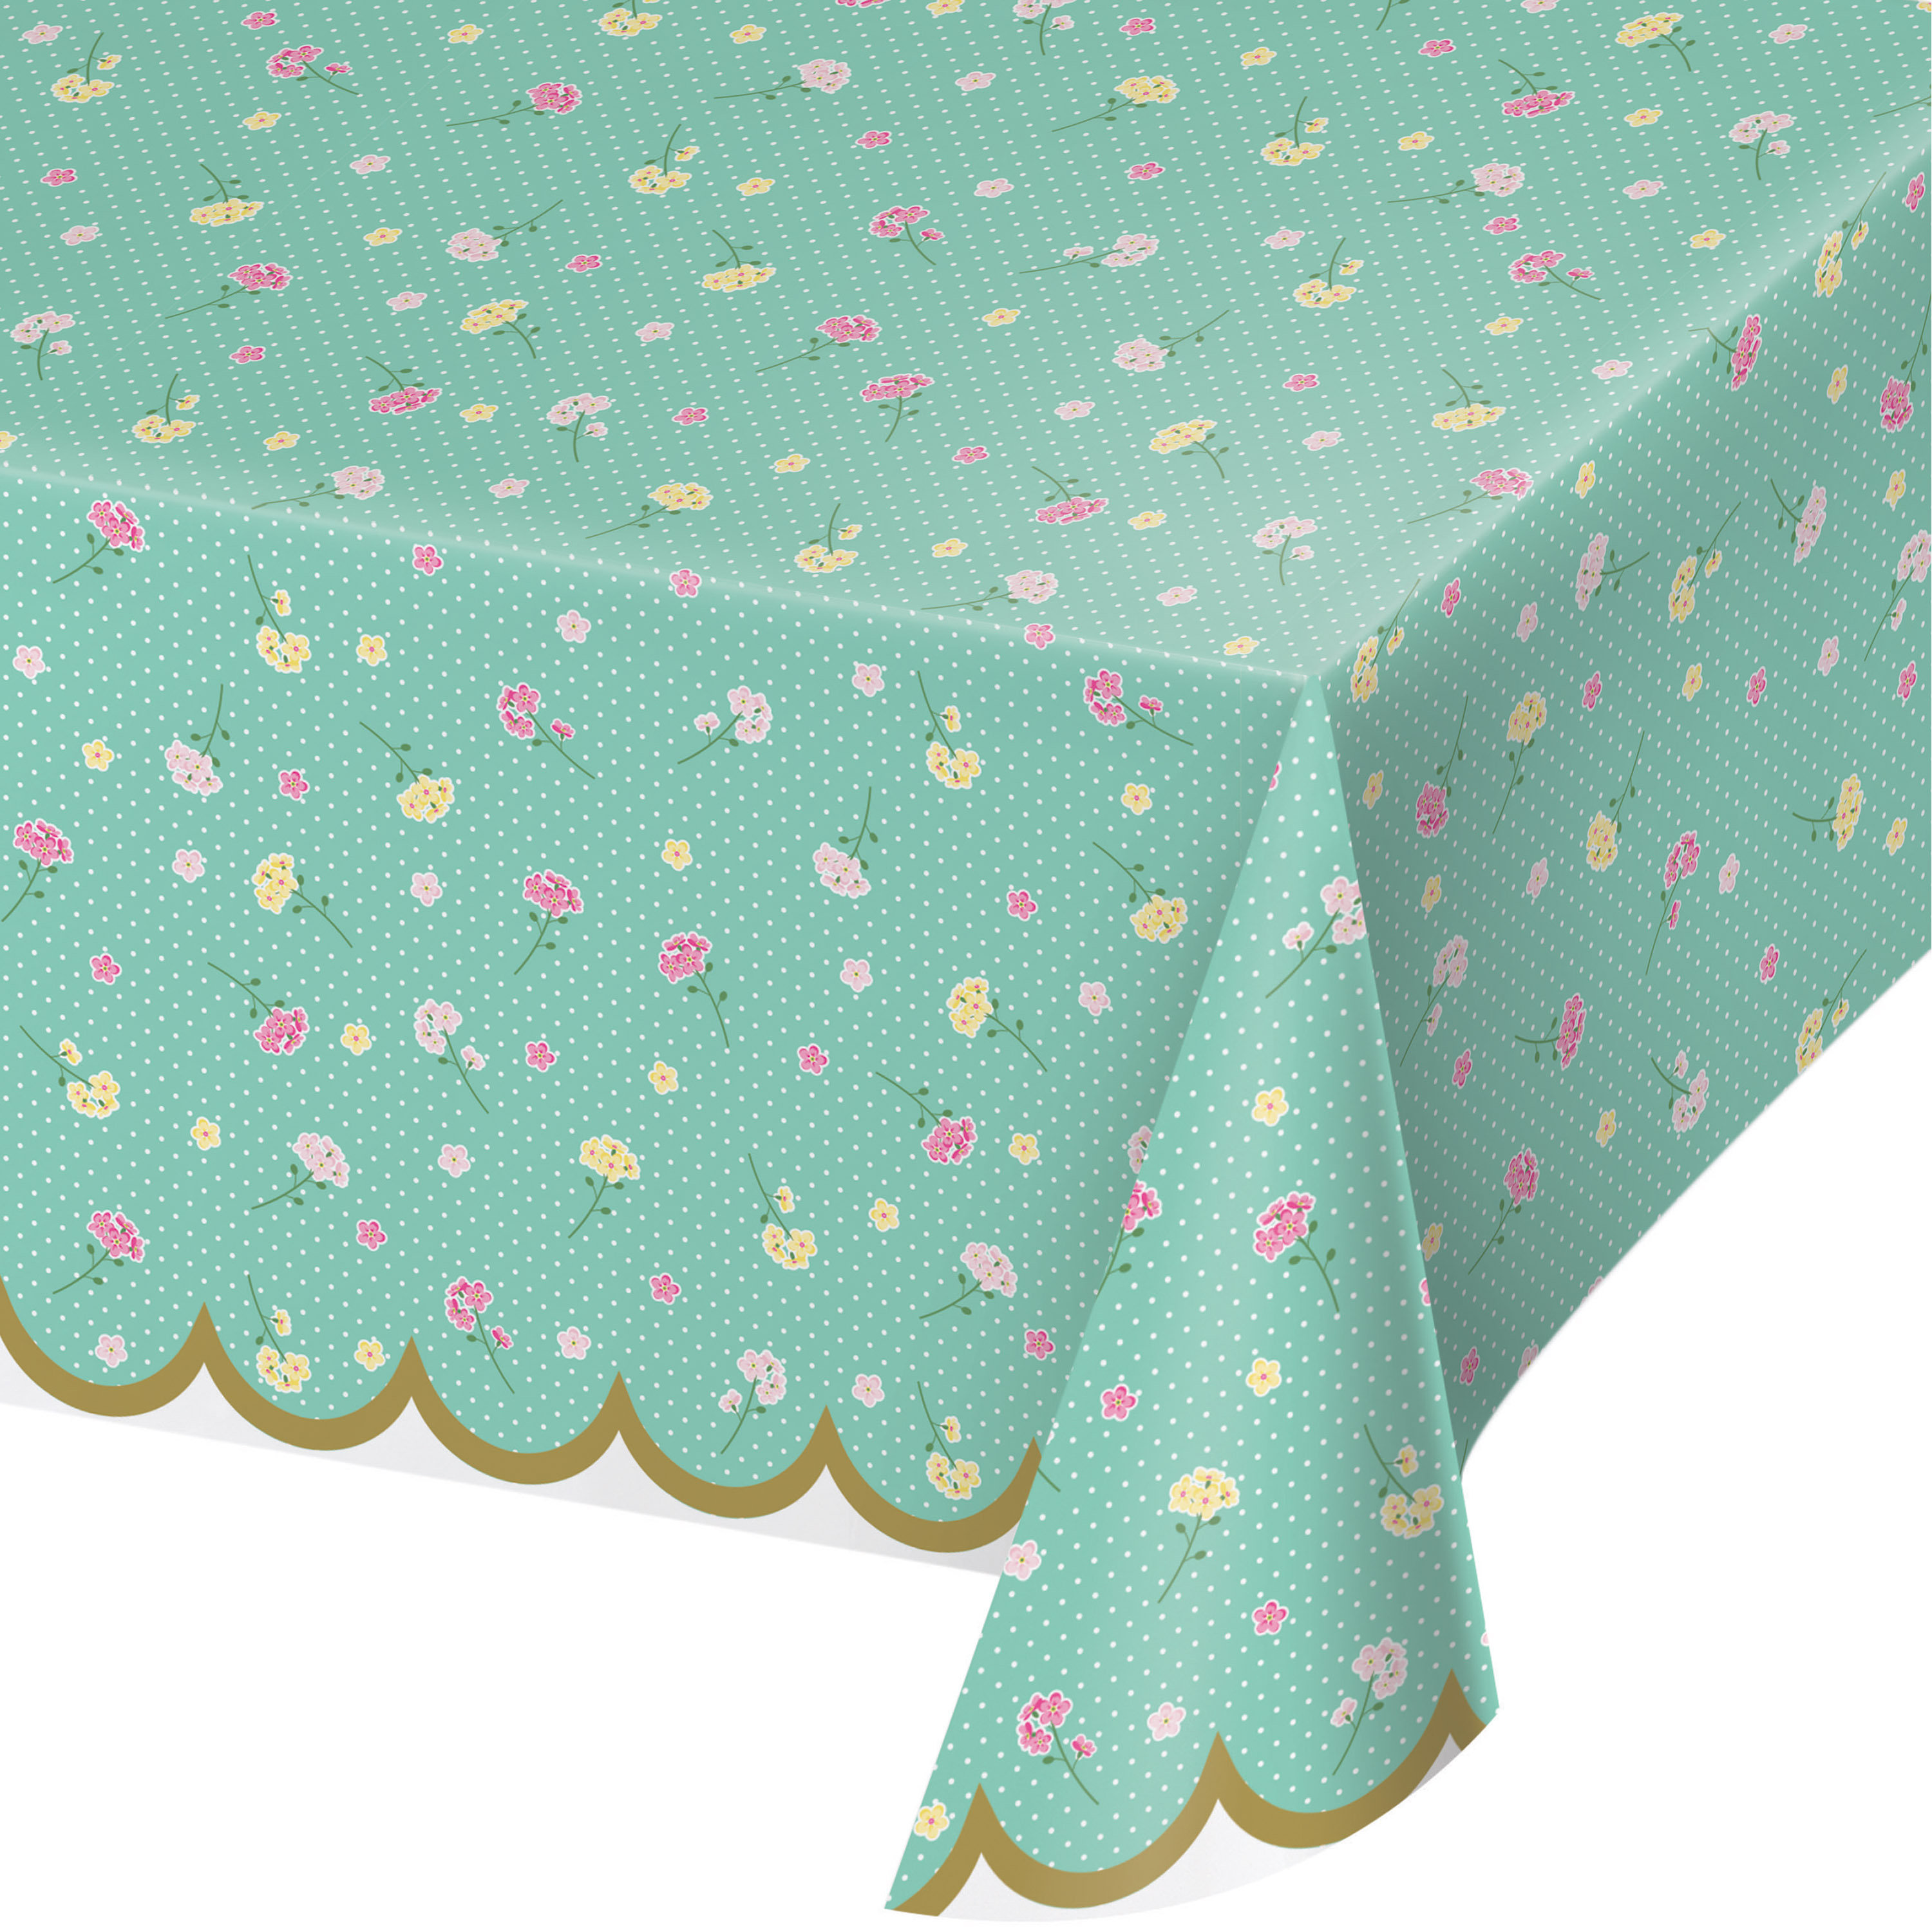 Bastin Peonies Peony Striped Spring Floral Garden Party Plastic Tablecover 